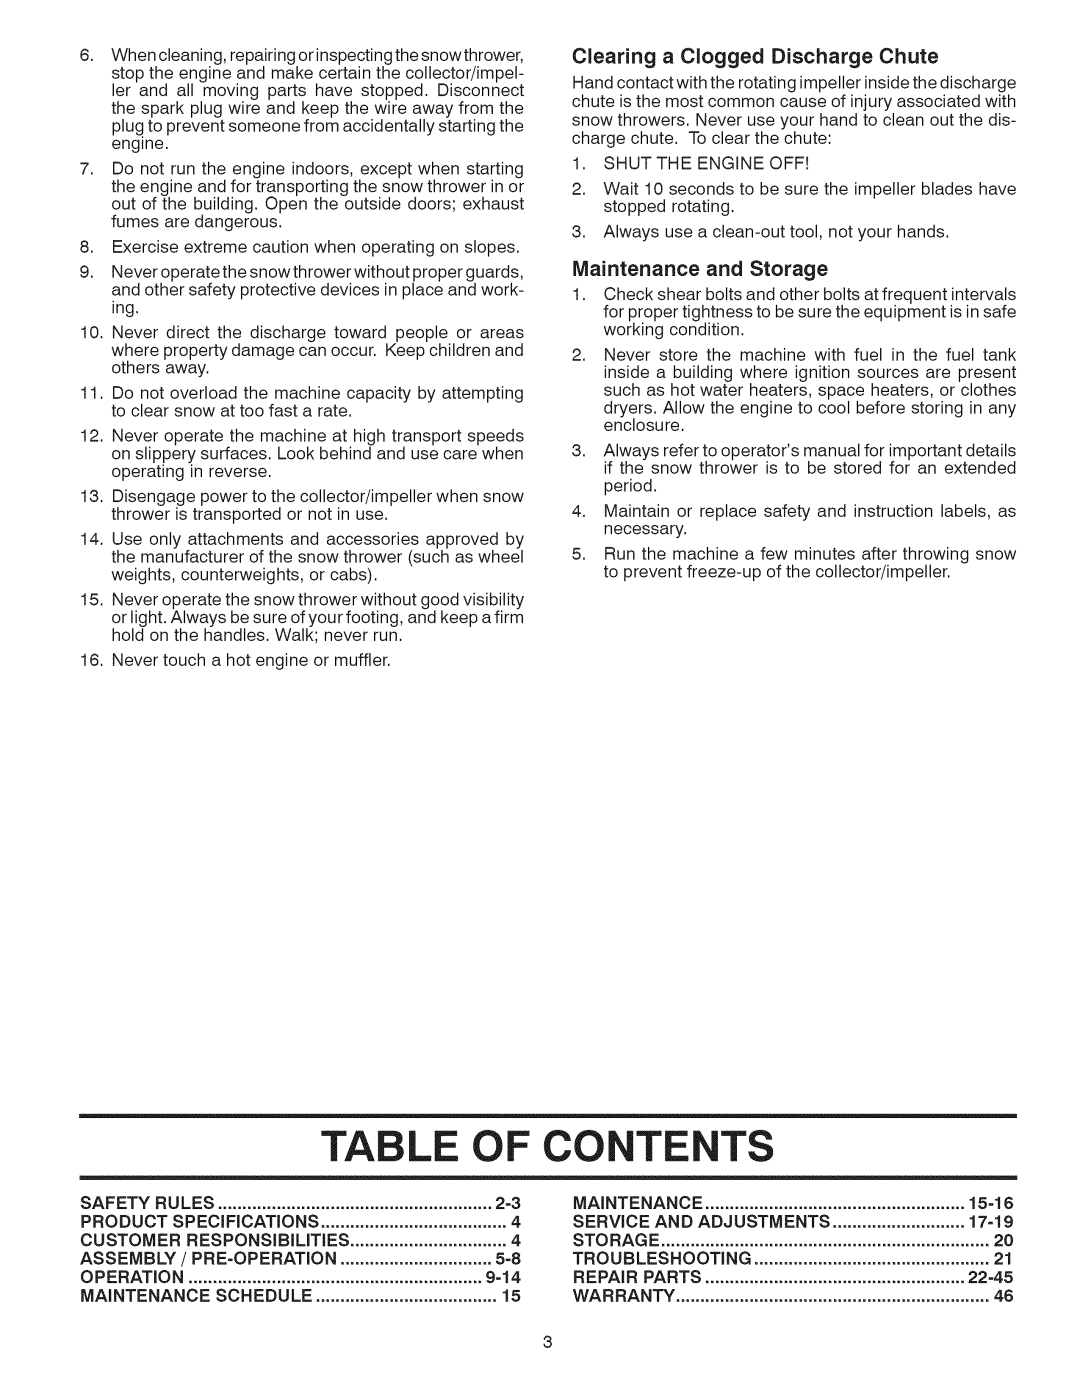 Craftsman 944.528398 owner manual Contents 